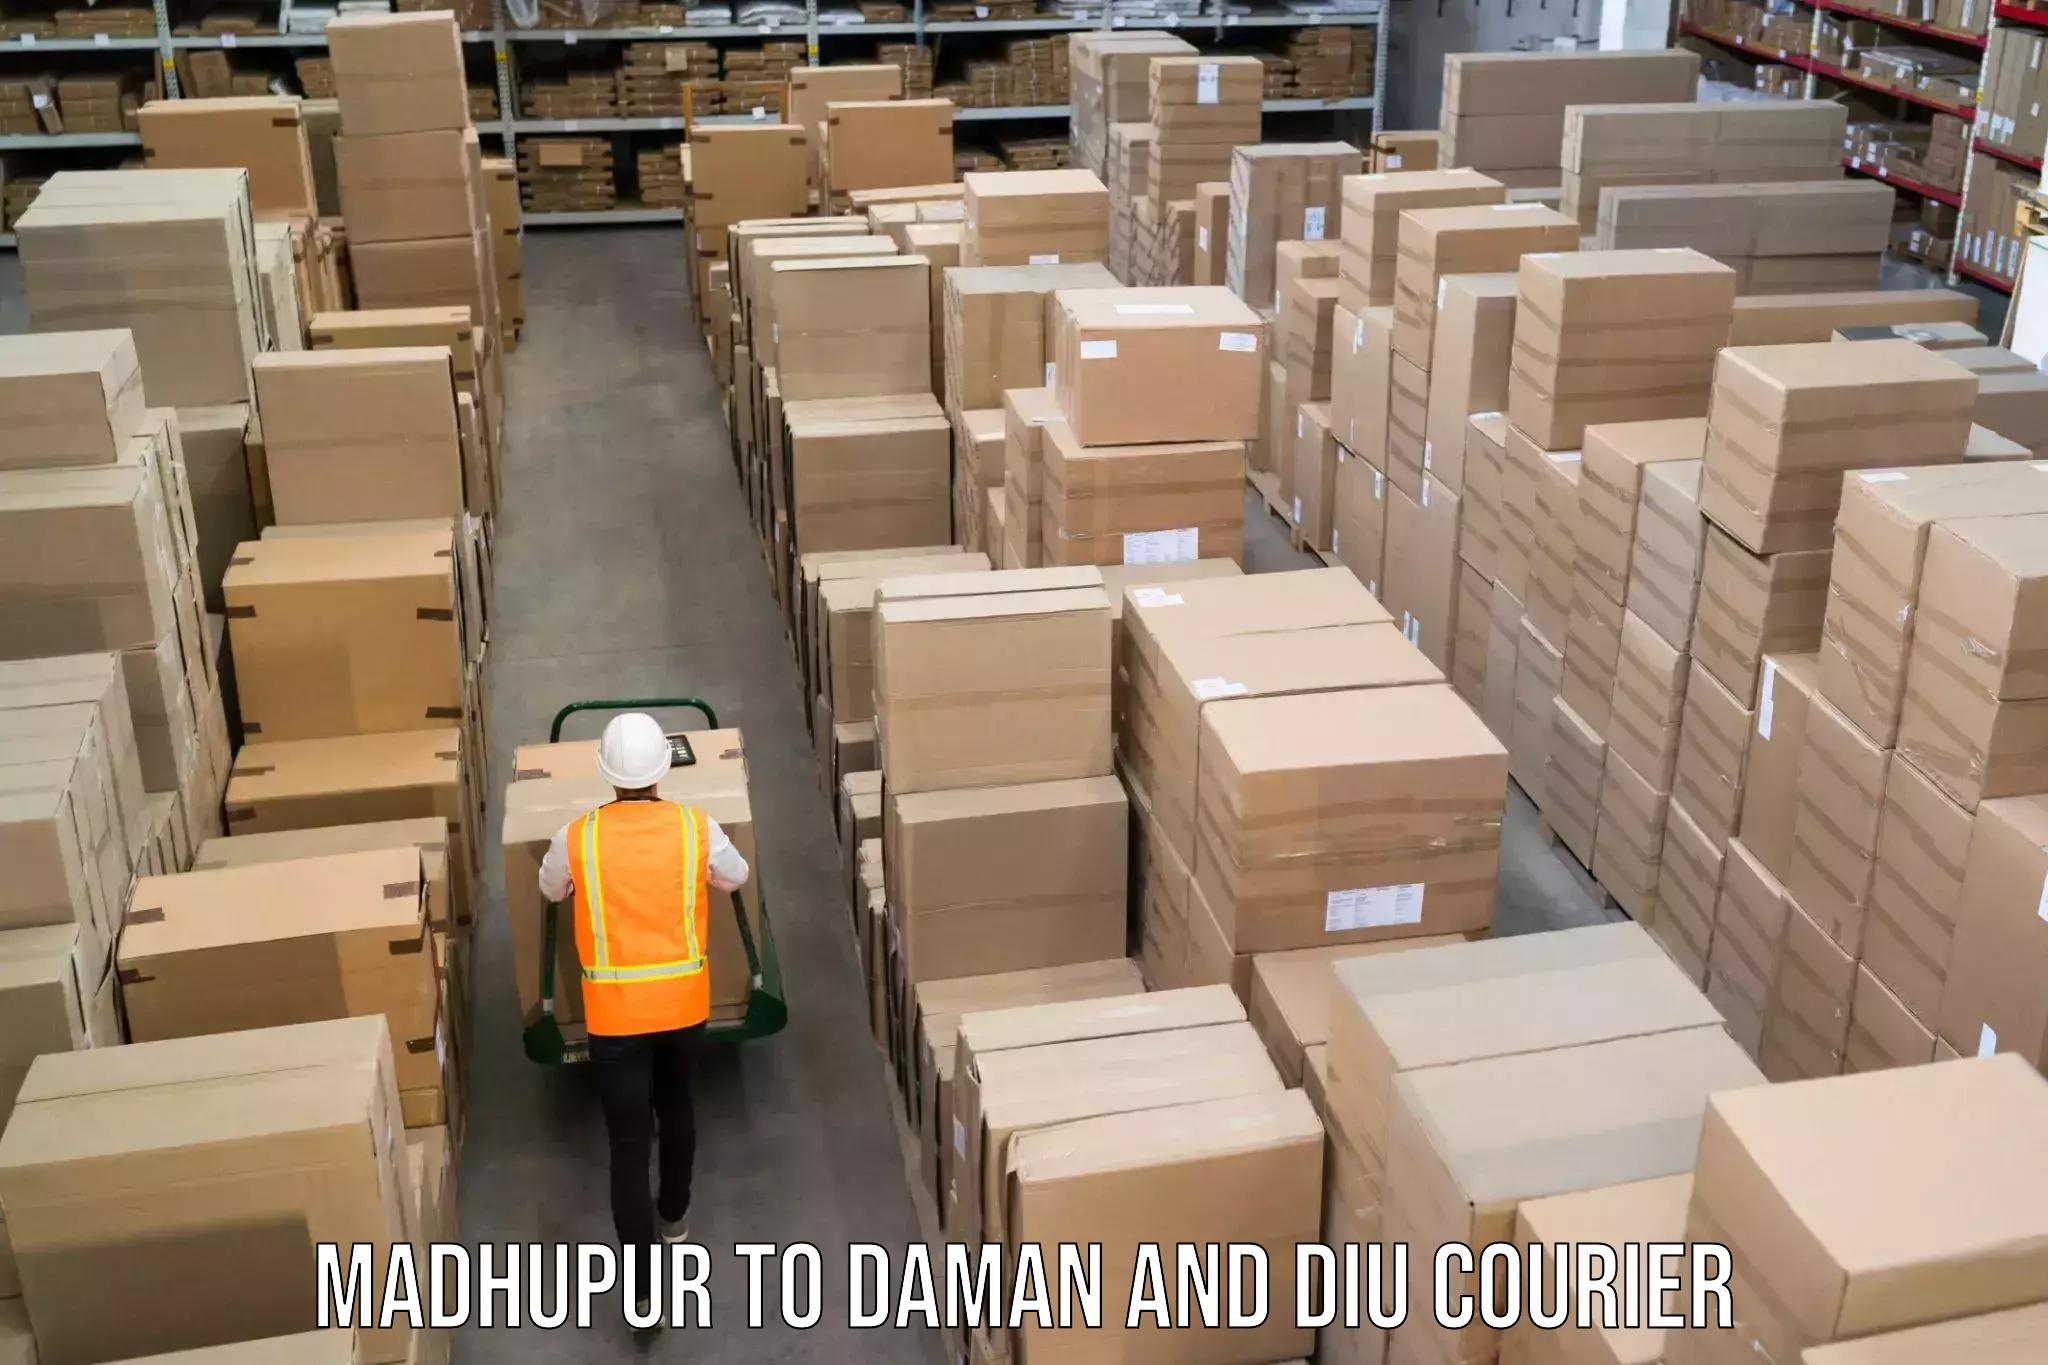 Luggage delivery app Madhupur to Daman and Diu